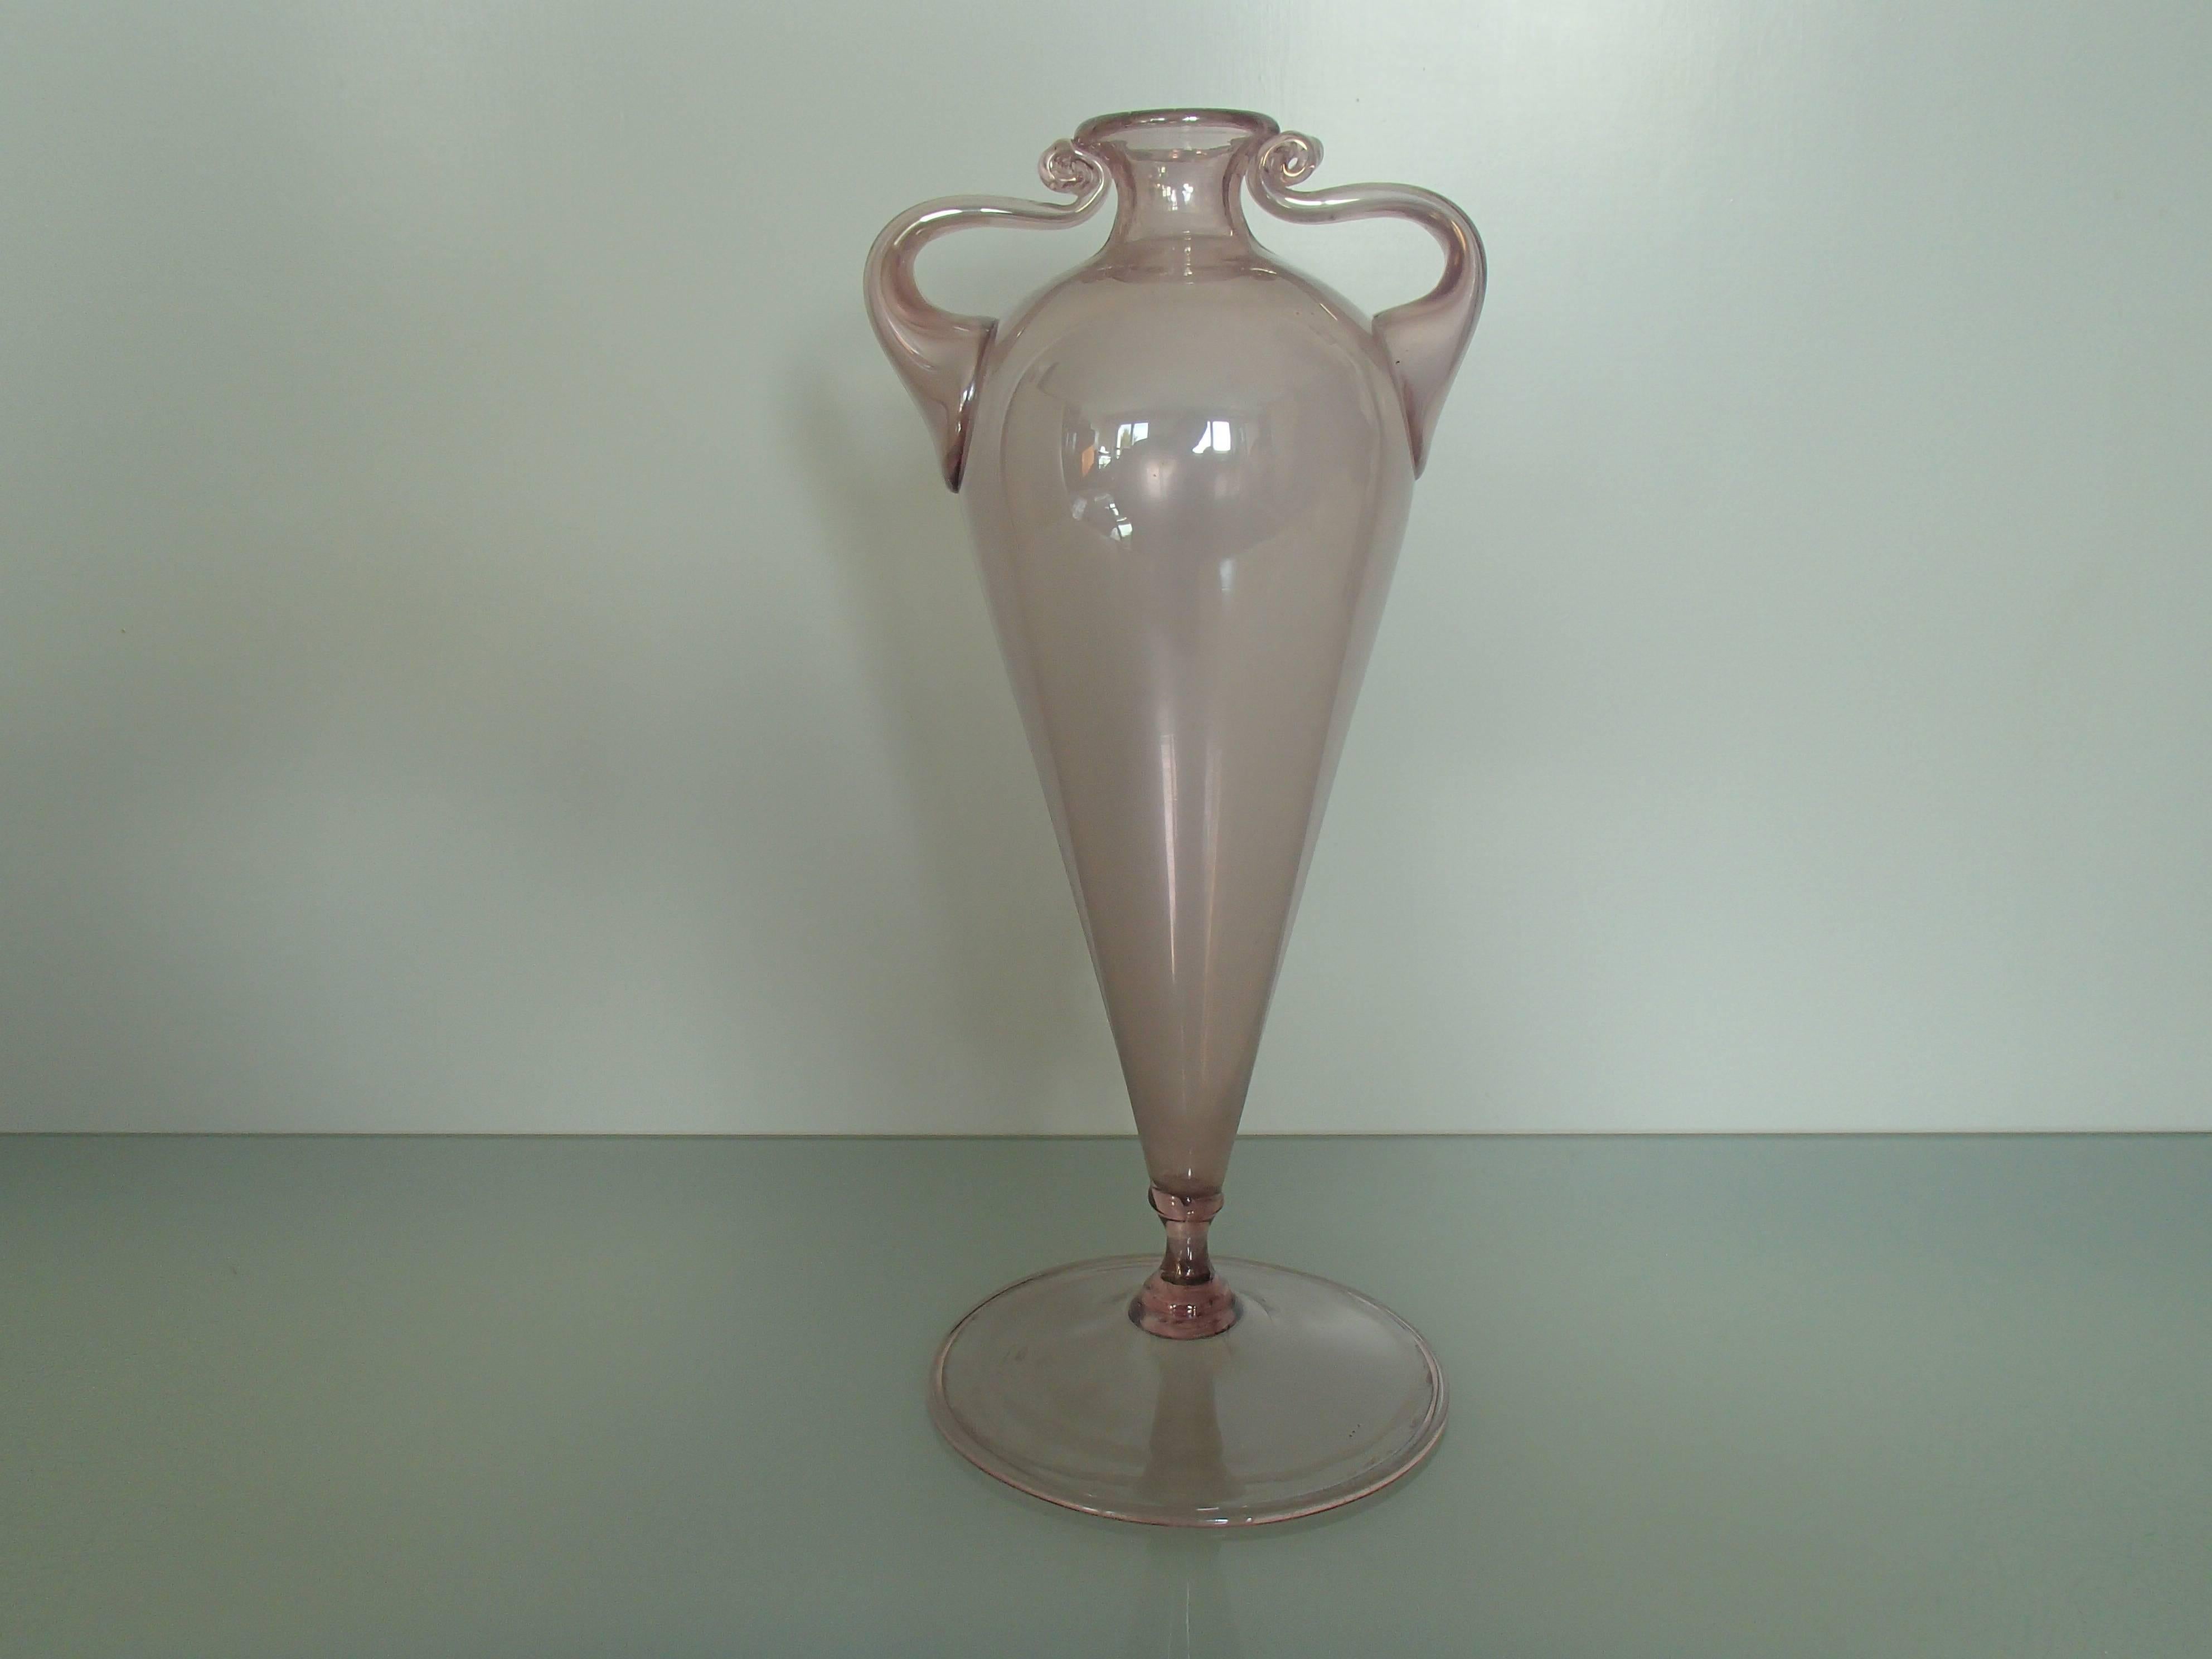 Small lilac vase like an Amphora.